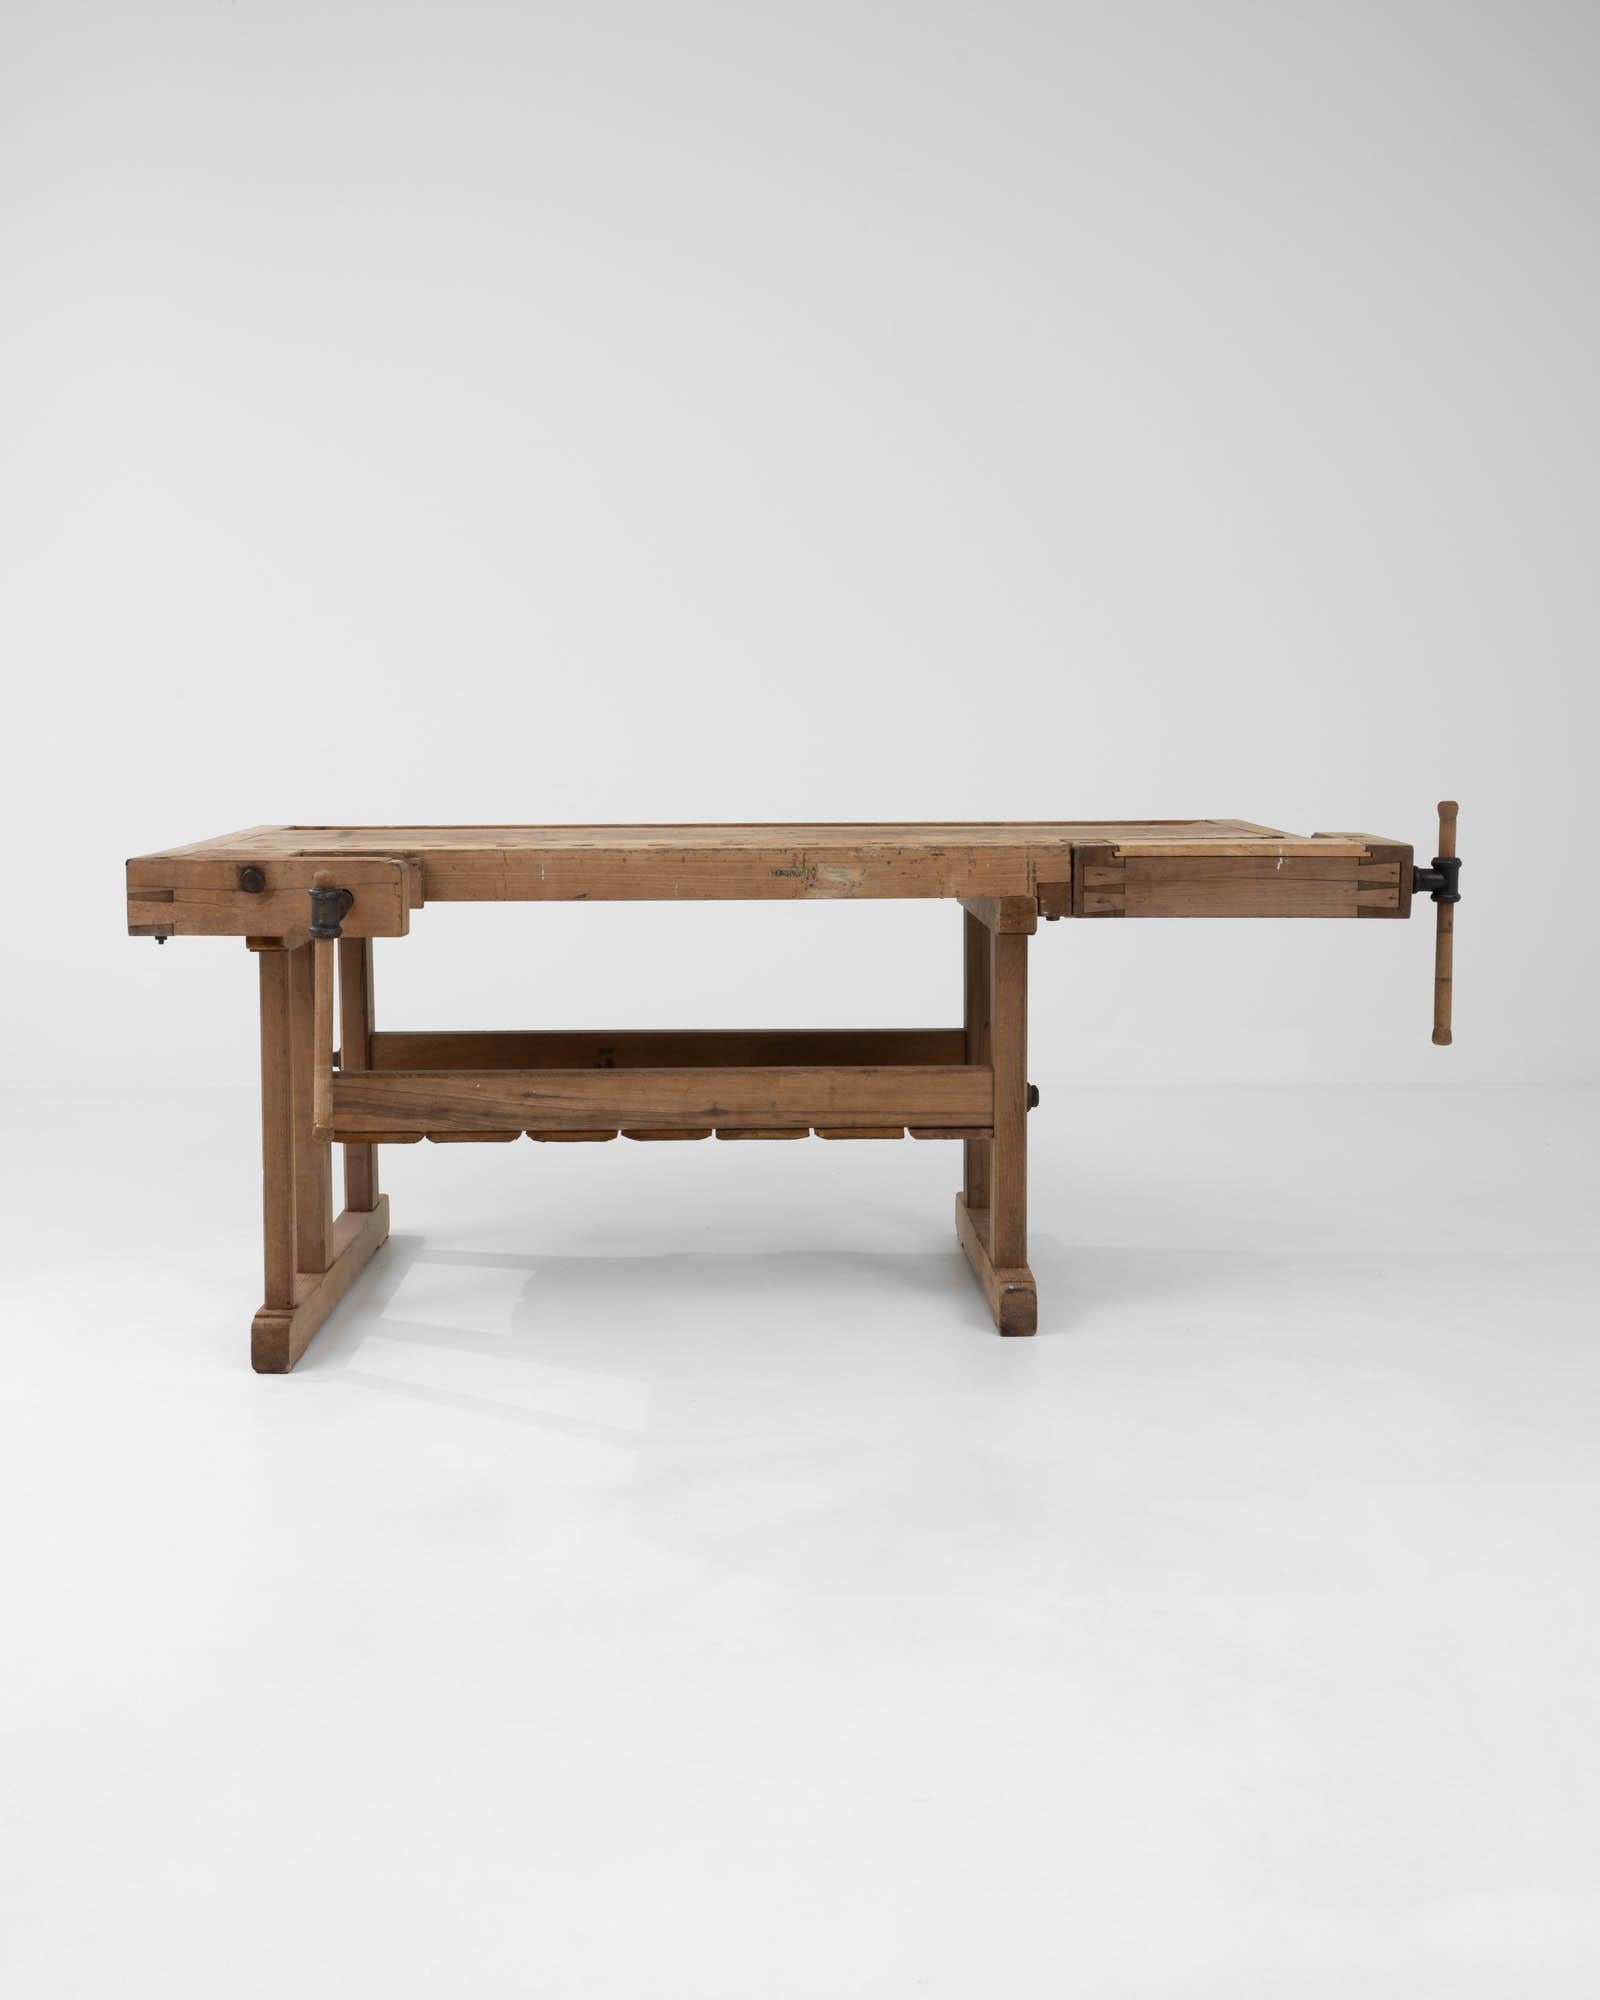 With its workmanlike design and warm natural finish, this vintage wooden table makes a striking Industrial accent. Built in Belgium in the 20th century, this piece would have originally been used as a carpenter’s work bench; the impressive metal